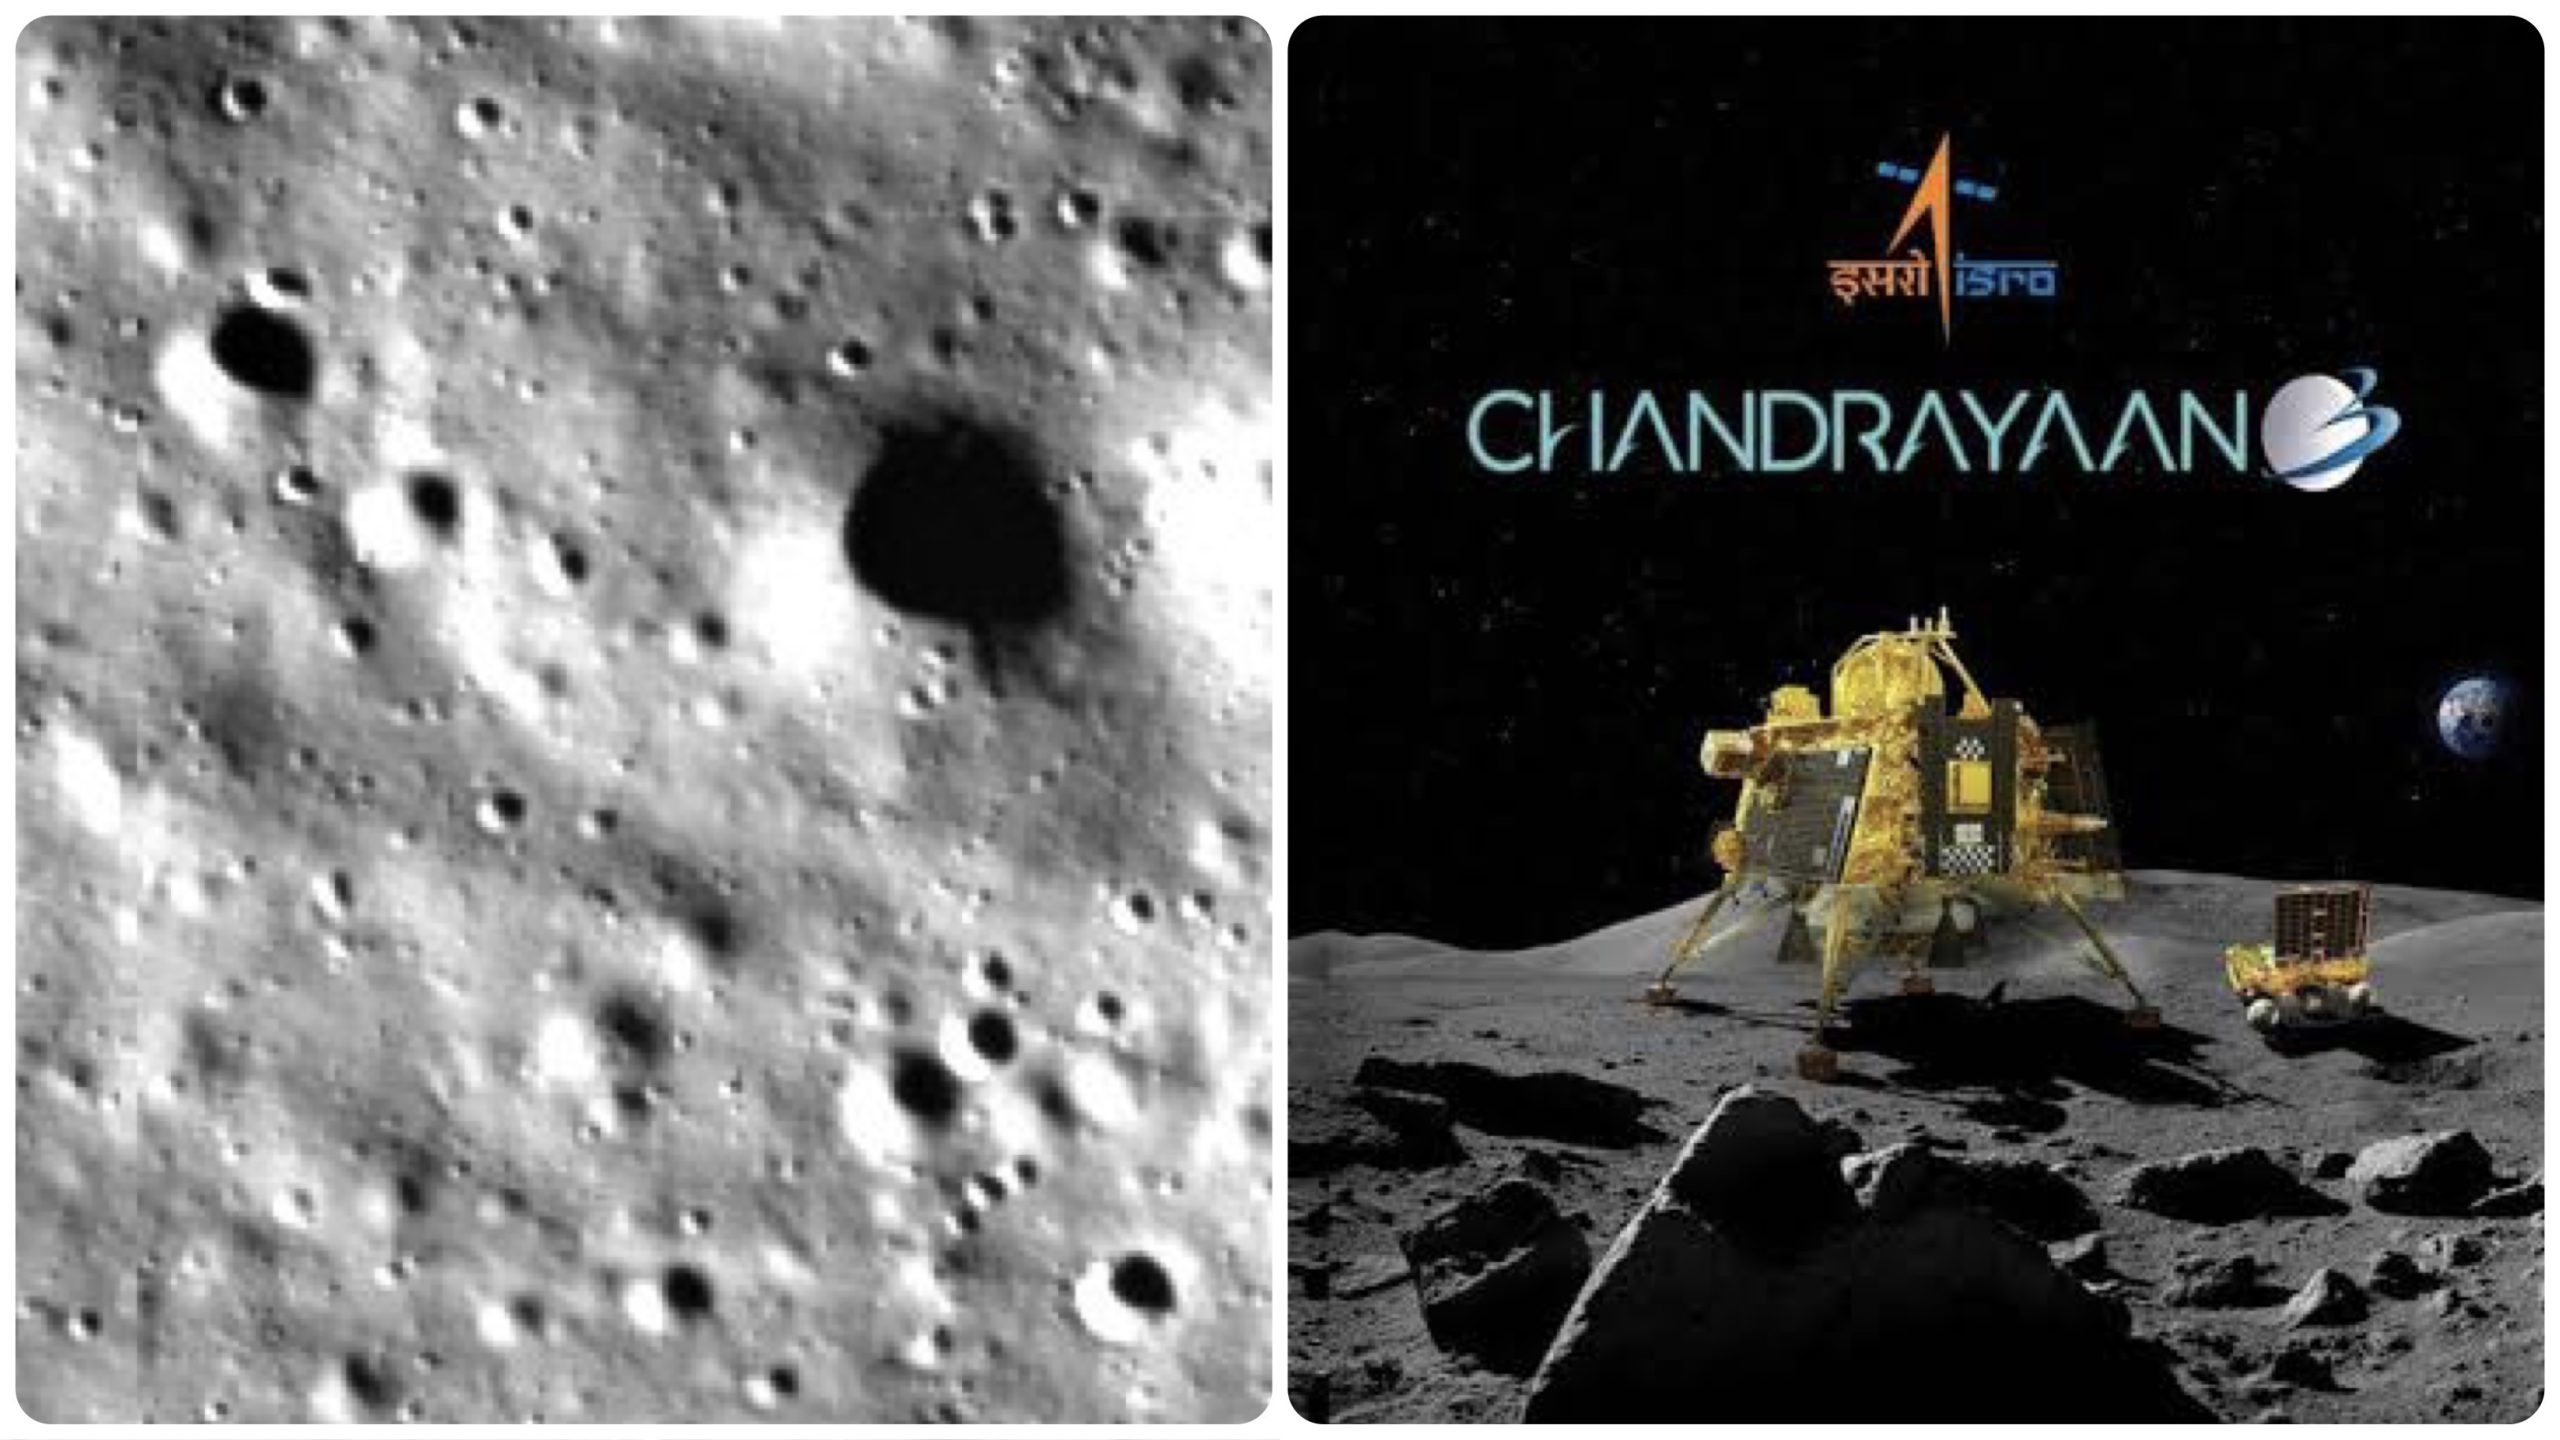 Chandrayaan-3 on the Moon: What is so special about the Moon's South Pole?